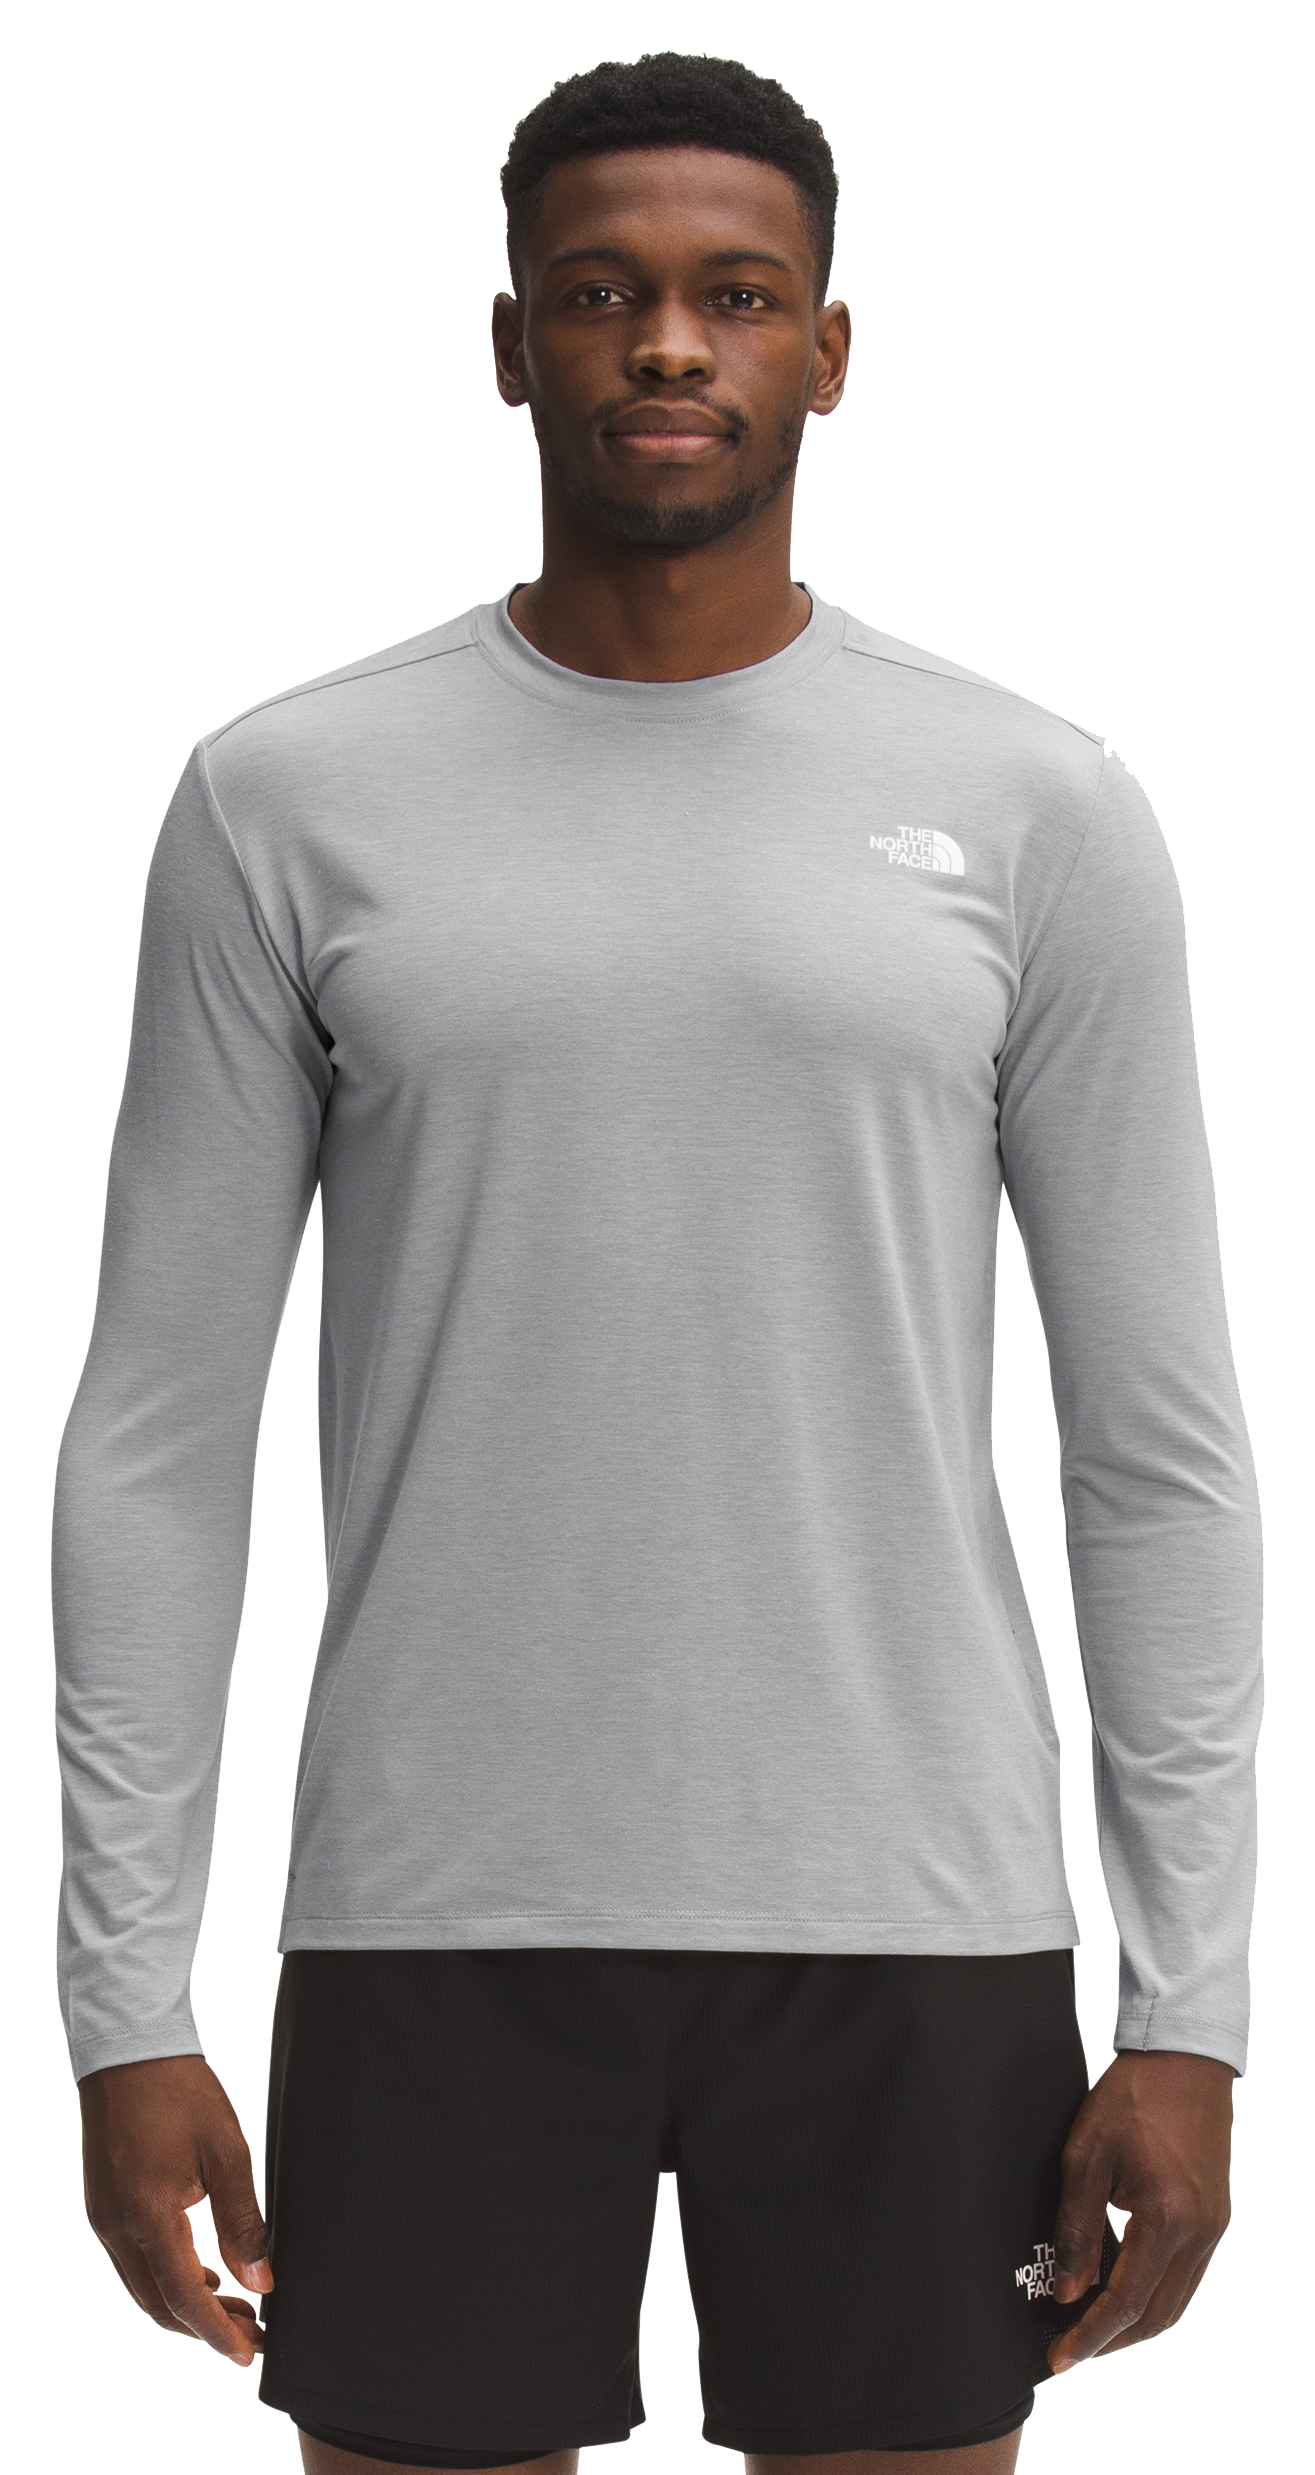 The North Face Wander Long-Sleeve Shirt for Men